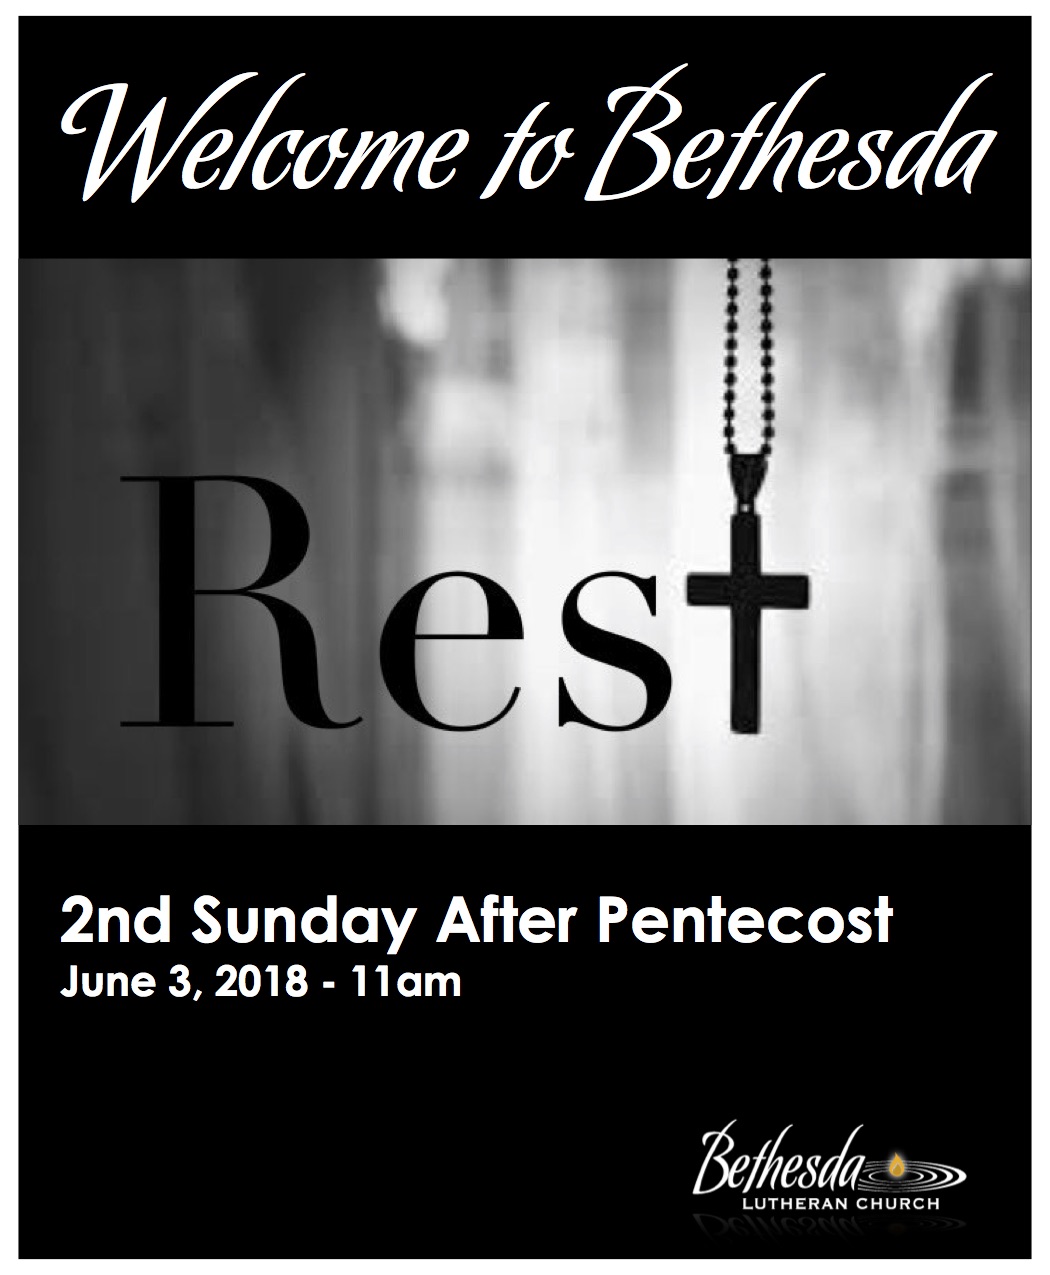 The Second Sunday after Pentecost 